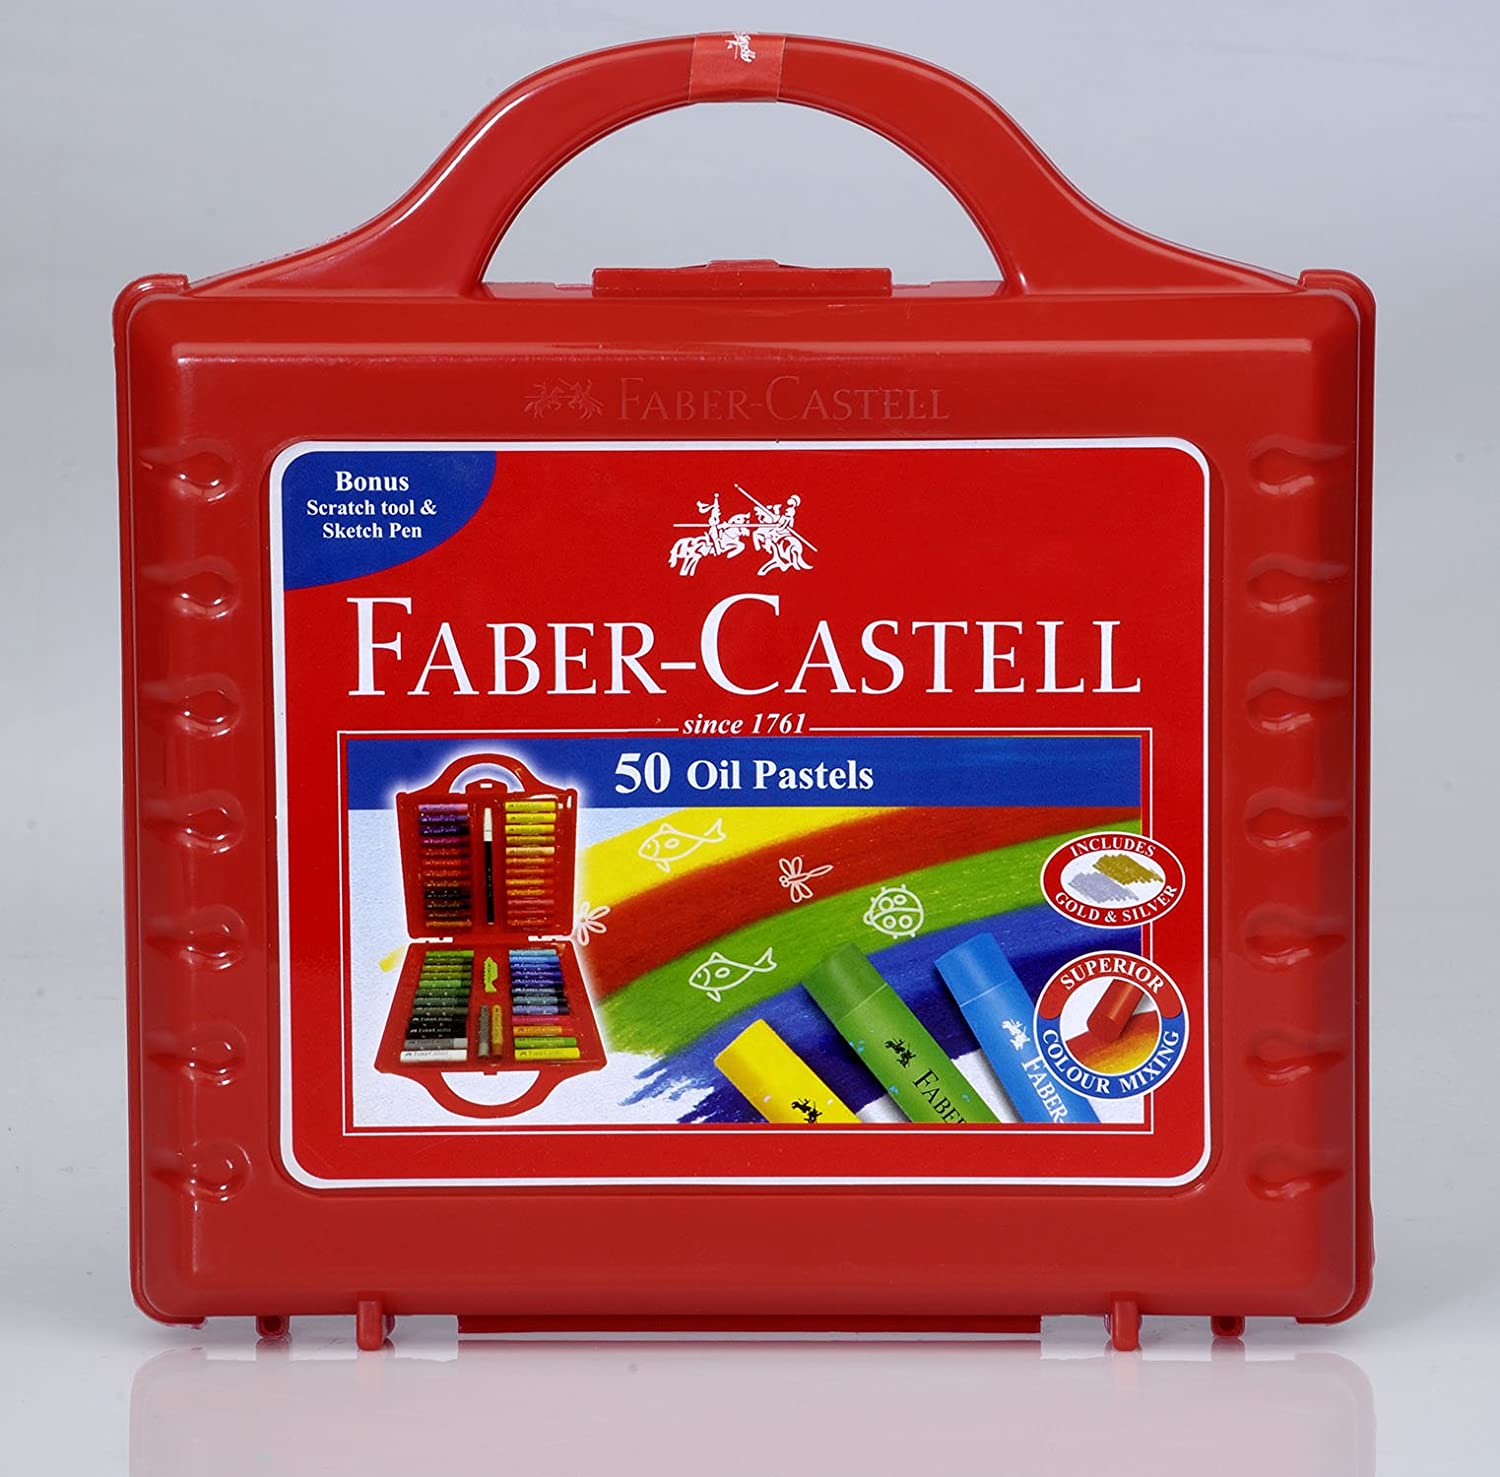 Faber-Castell Oil Pastels Set of 50 Easy to Pack and Carry Colour